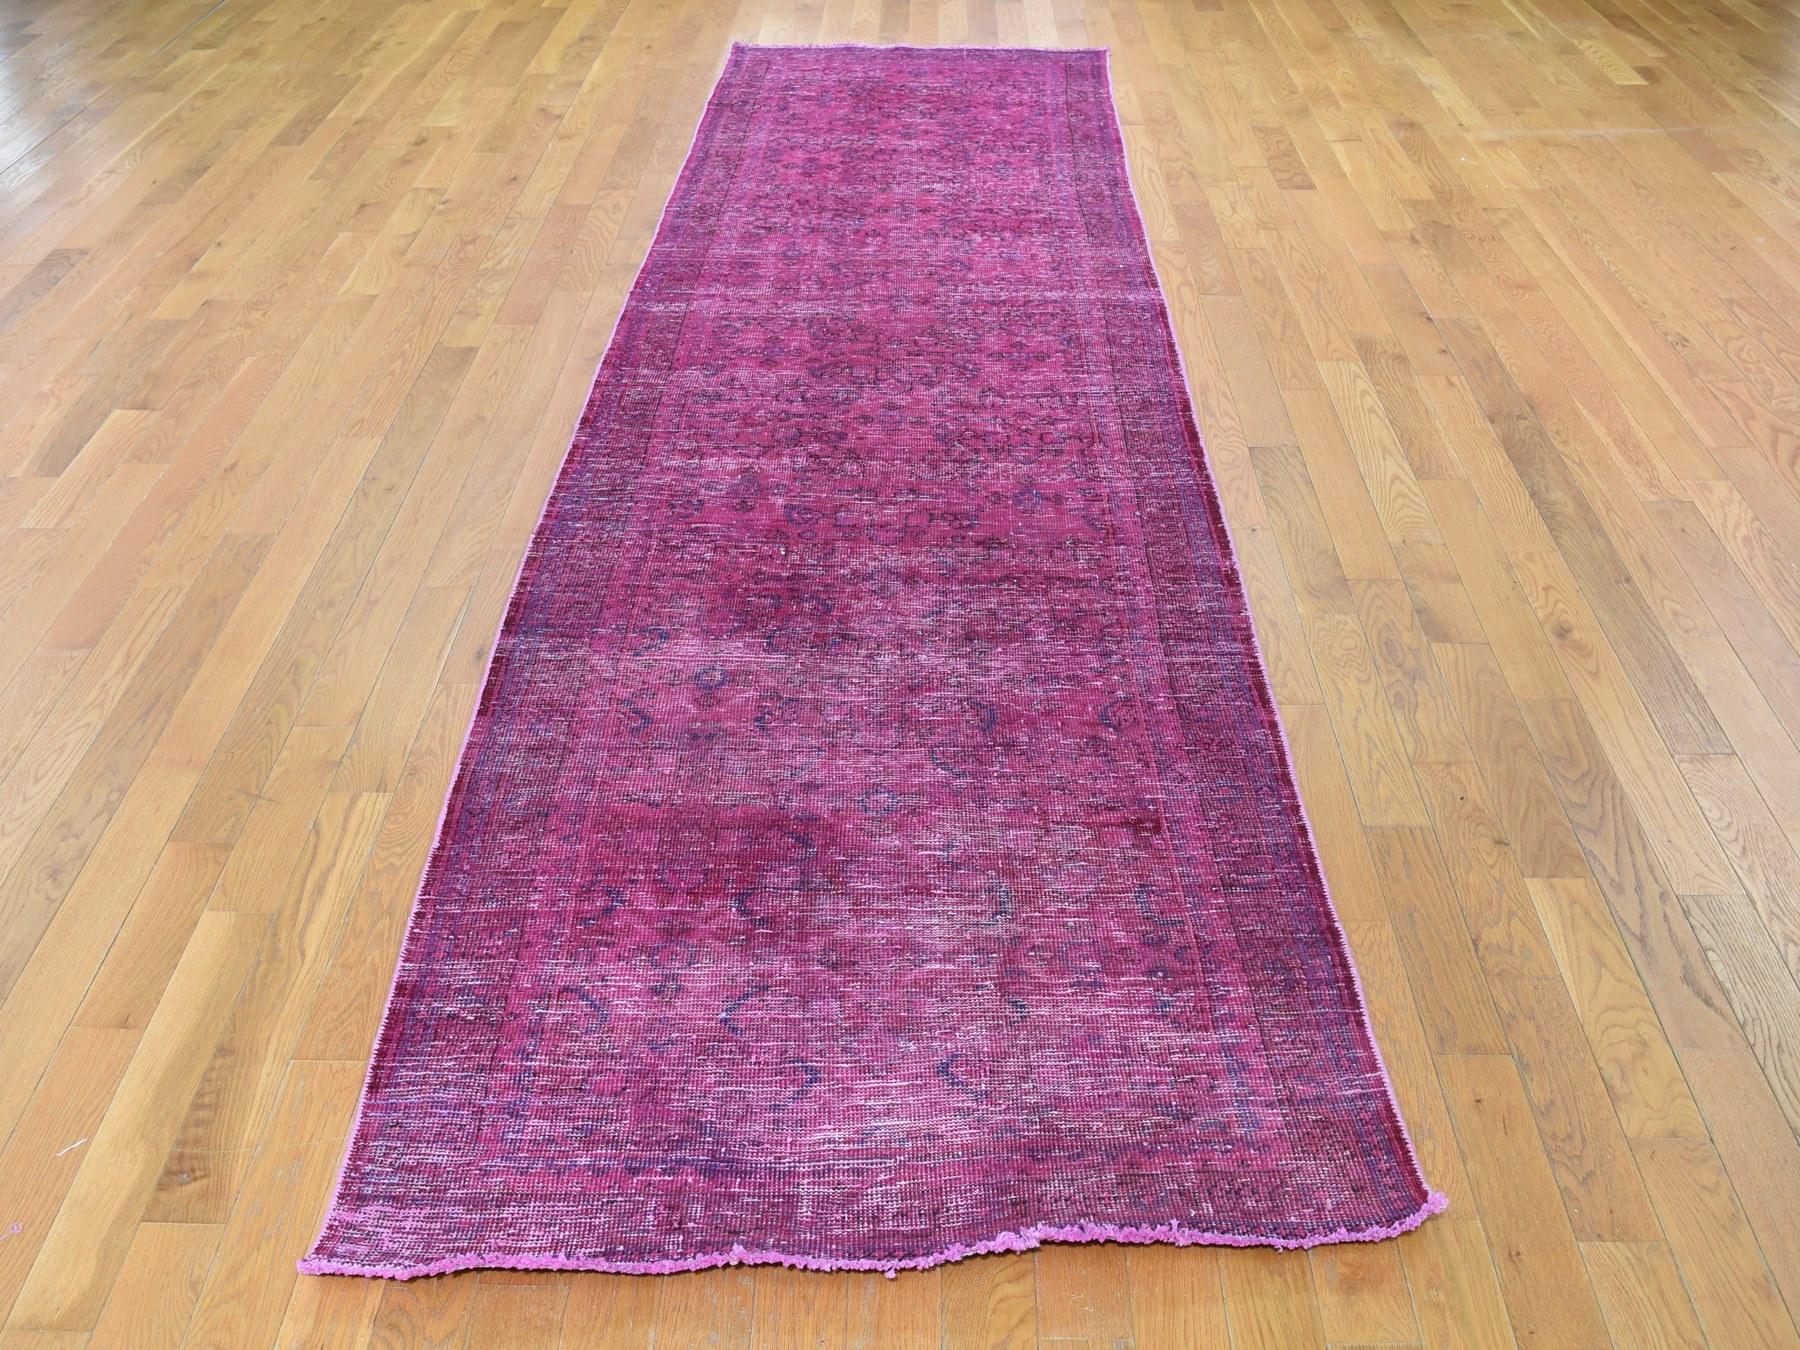 This is a truly genuine one-of-a-kind overdyed Persian Tabriz worn hand knotted wide runner Oriental rug. It has been knotted for months and months in the centuries-old Persian weaving craftsmanship techniques by expert artisans.

Primary